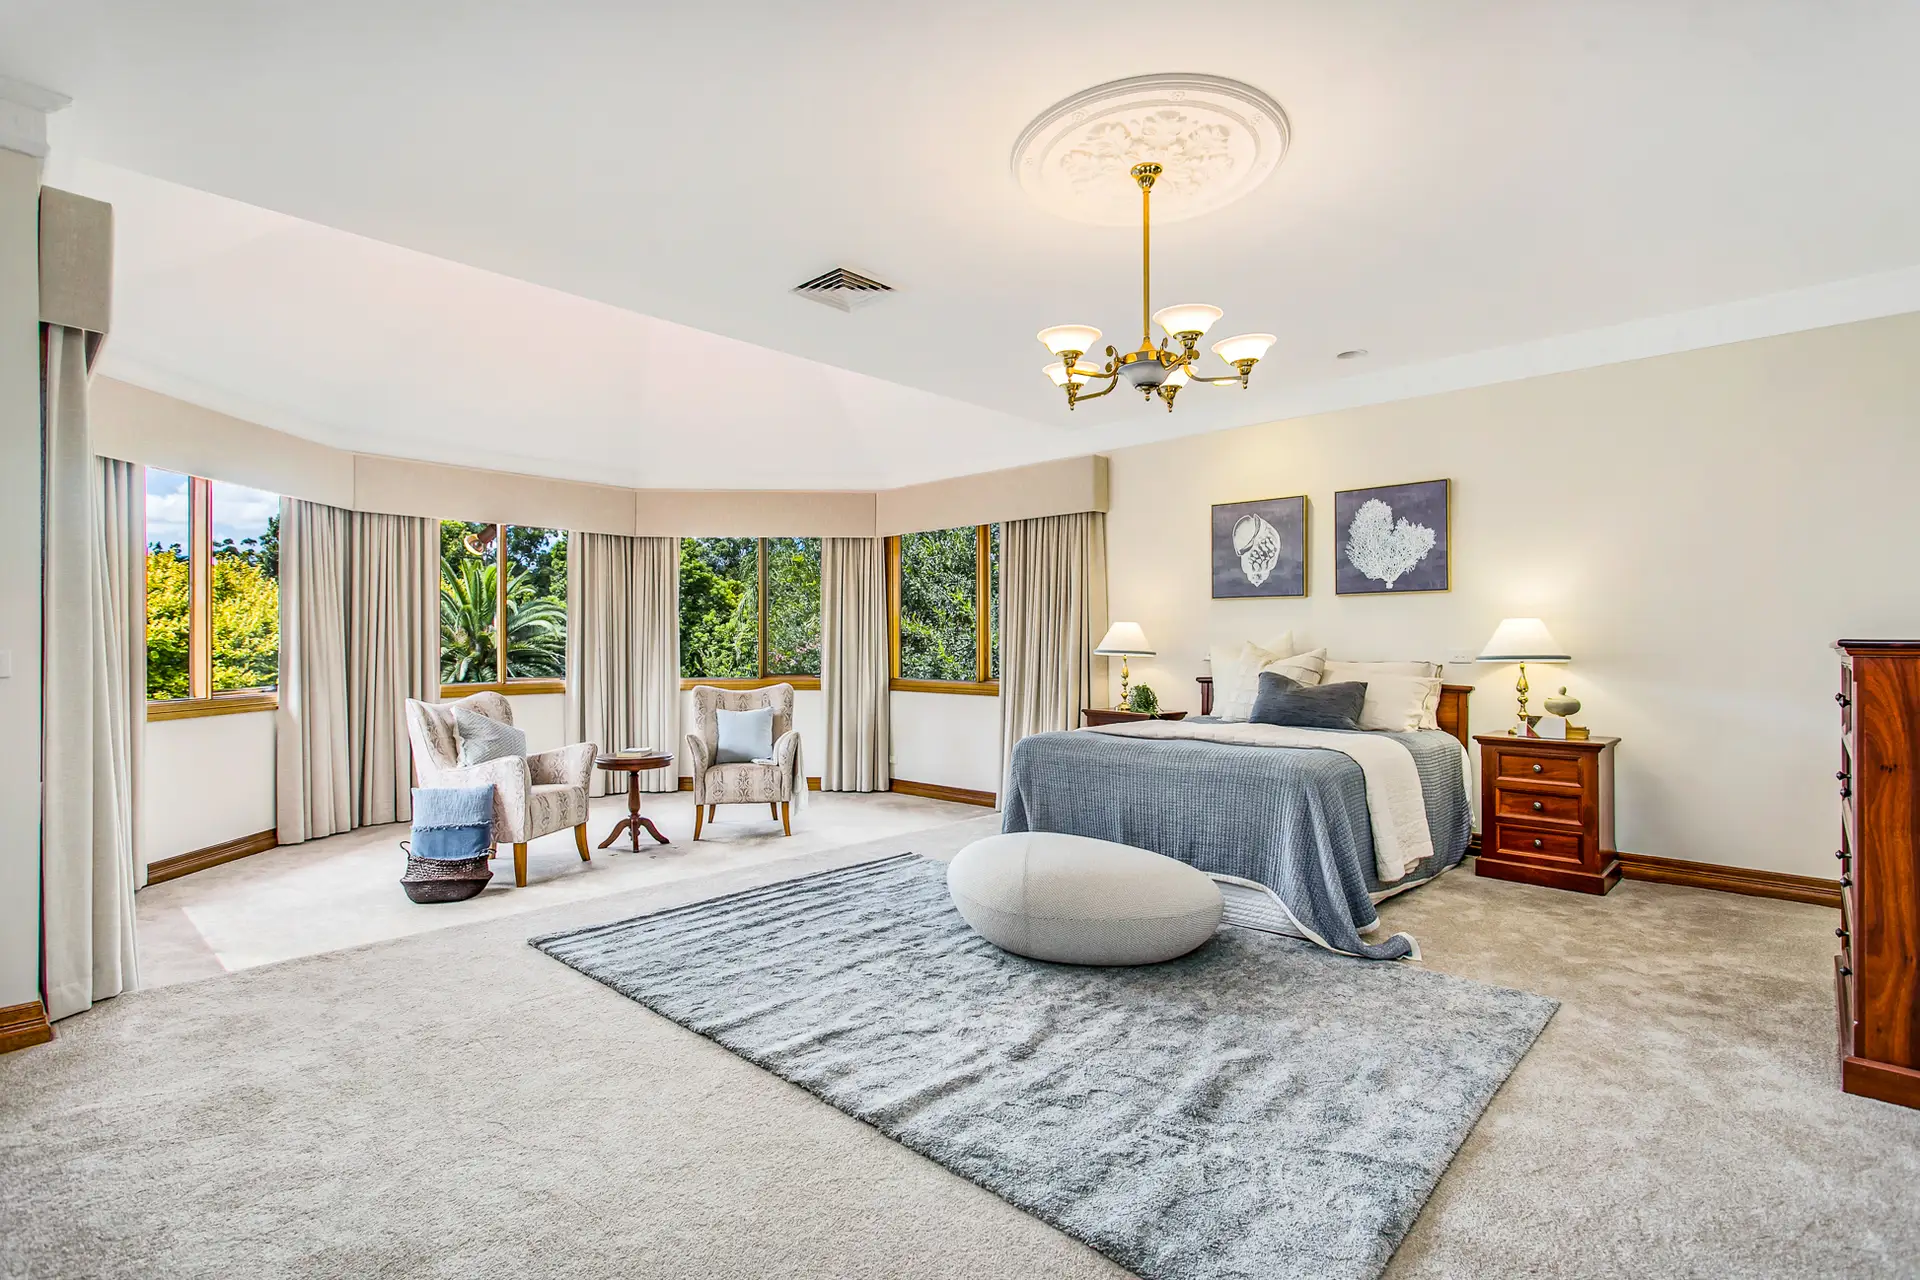 Photo #10: 21 And 23 Jacana Place, West Pennant Hills - Sold by Louis Carr Real Estate